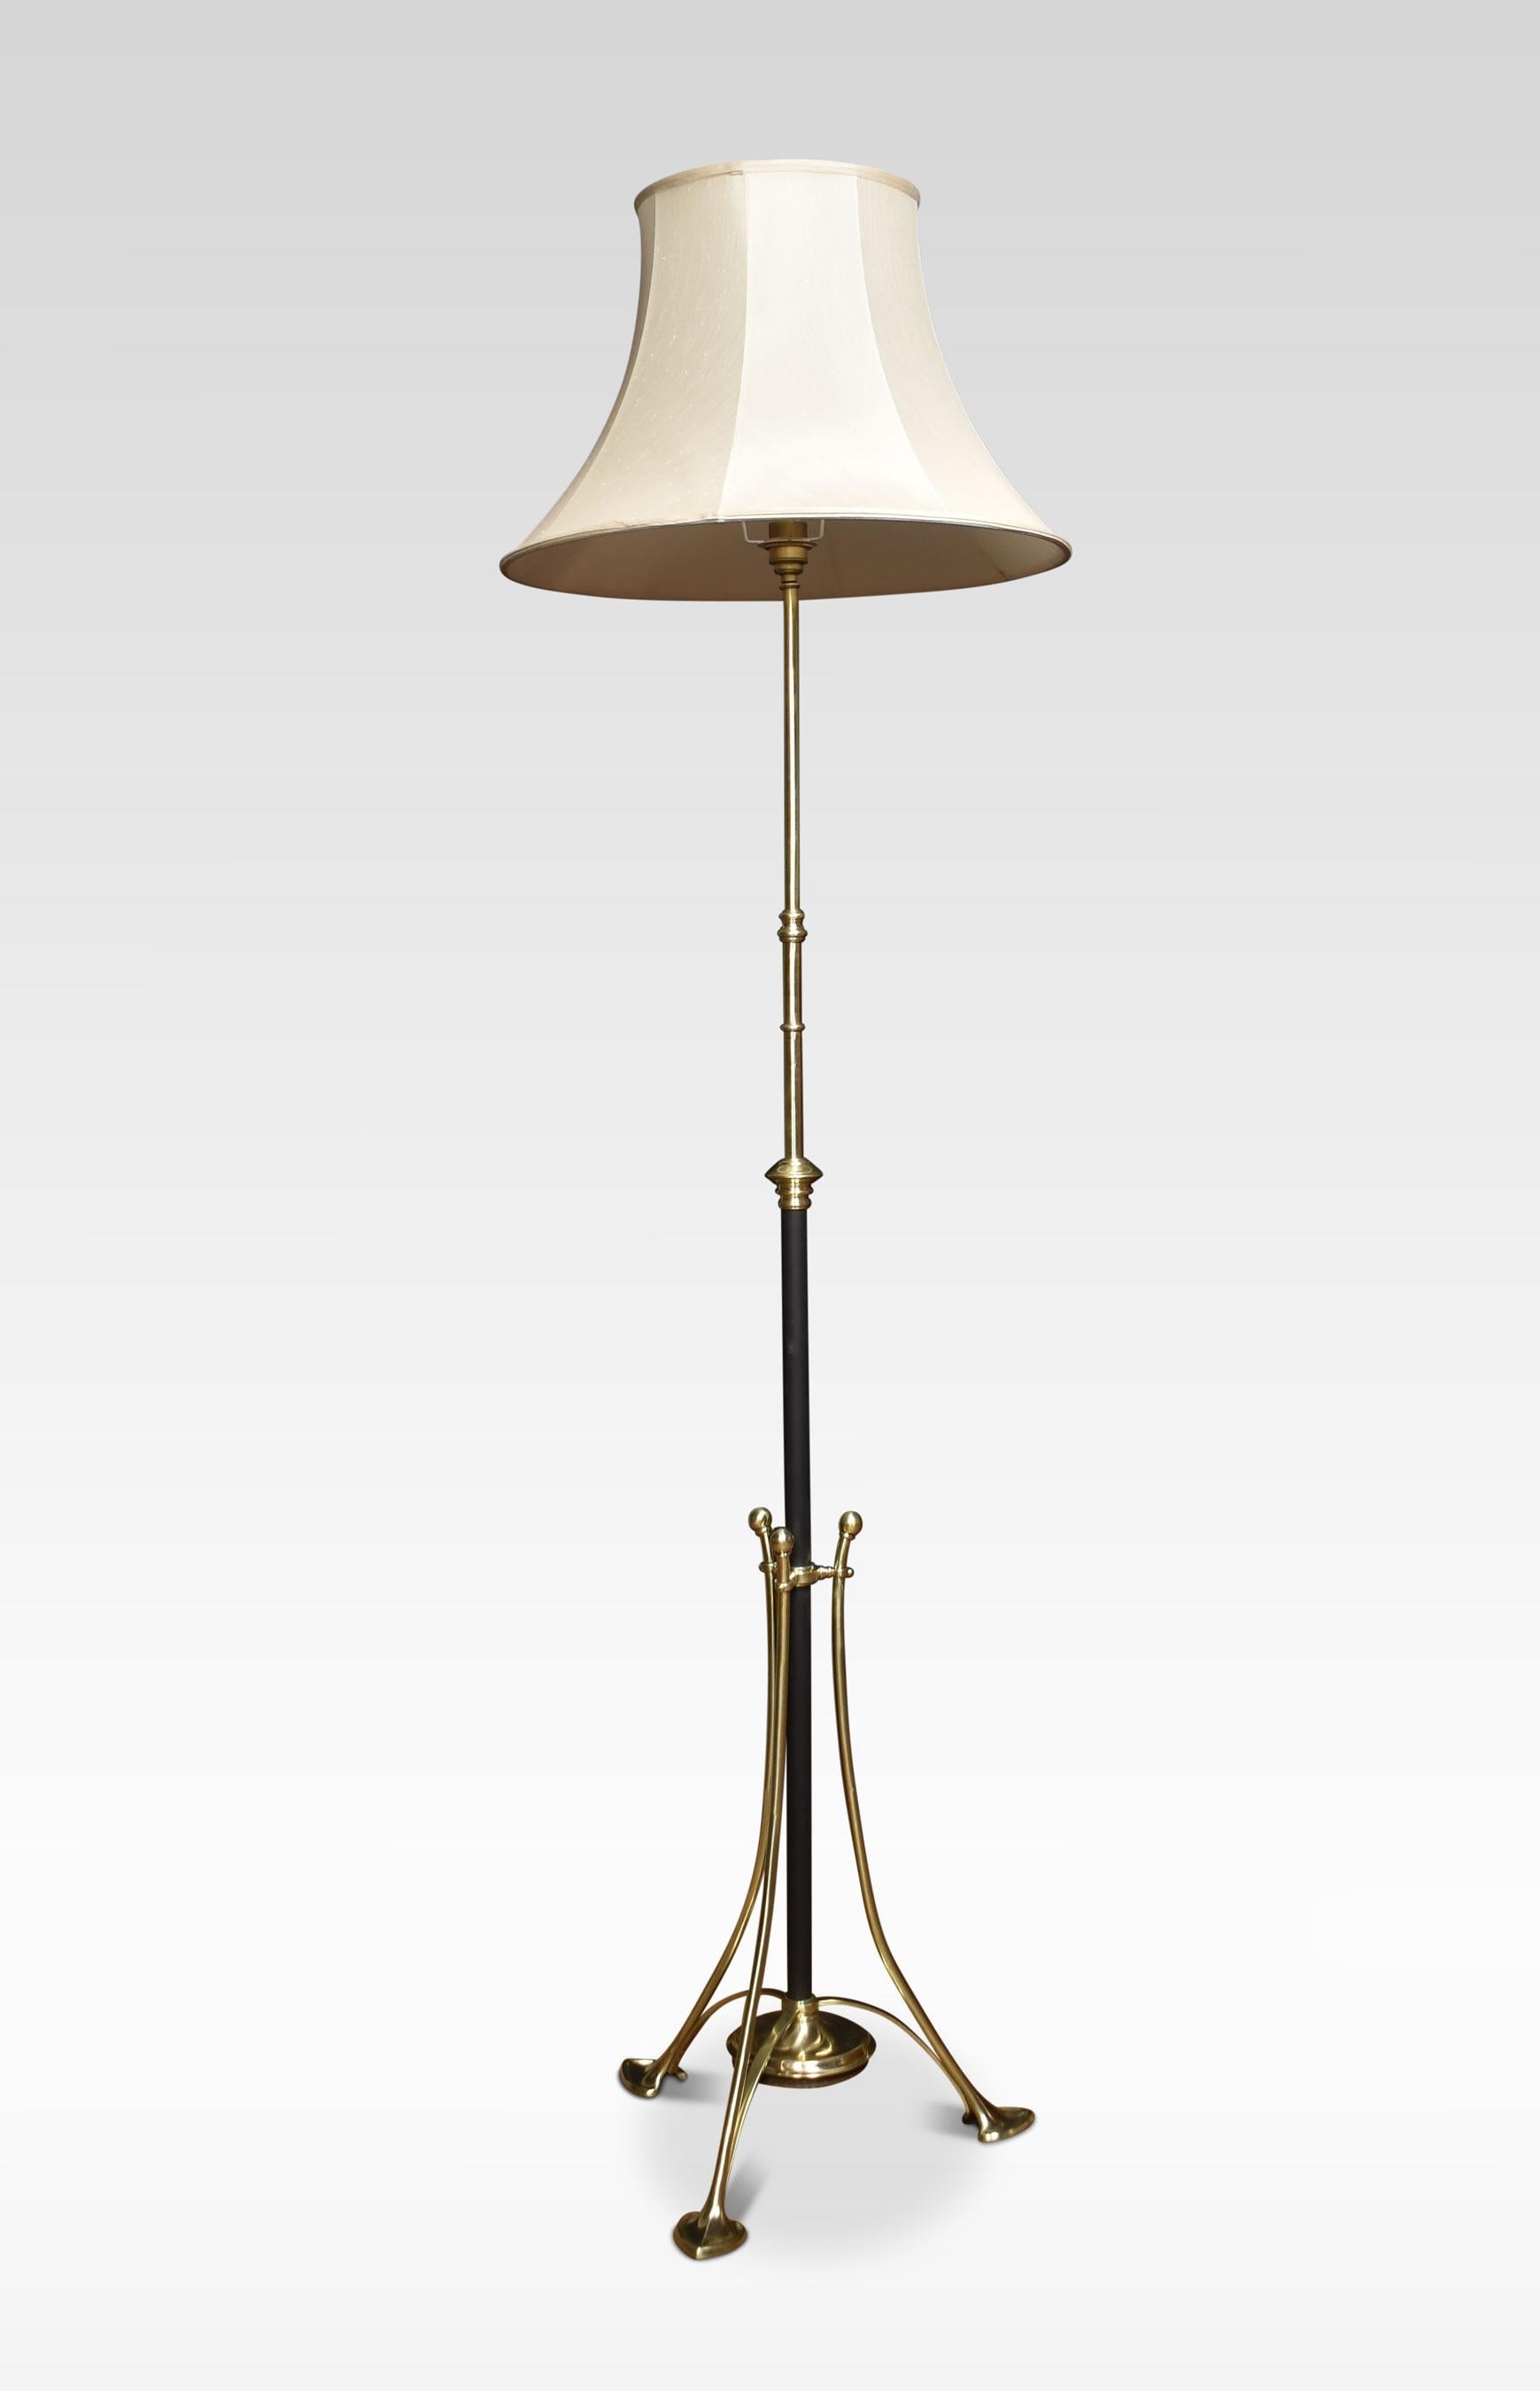 Art Nouveau brass standard lamp, the circular adjustable brass column raised up on outswept sinuous supports, terminating on leaf-like feet.
Dimensions
Height 59 Inches adjustable to 74.5 Inches
Width 17.5 Inches
Depth of 17.5 Inches.